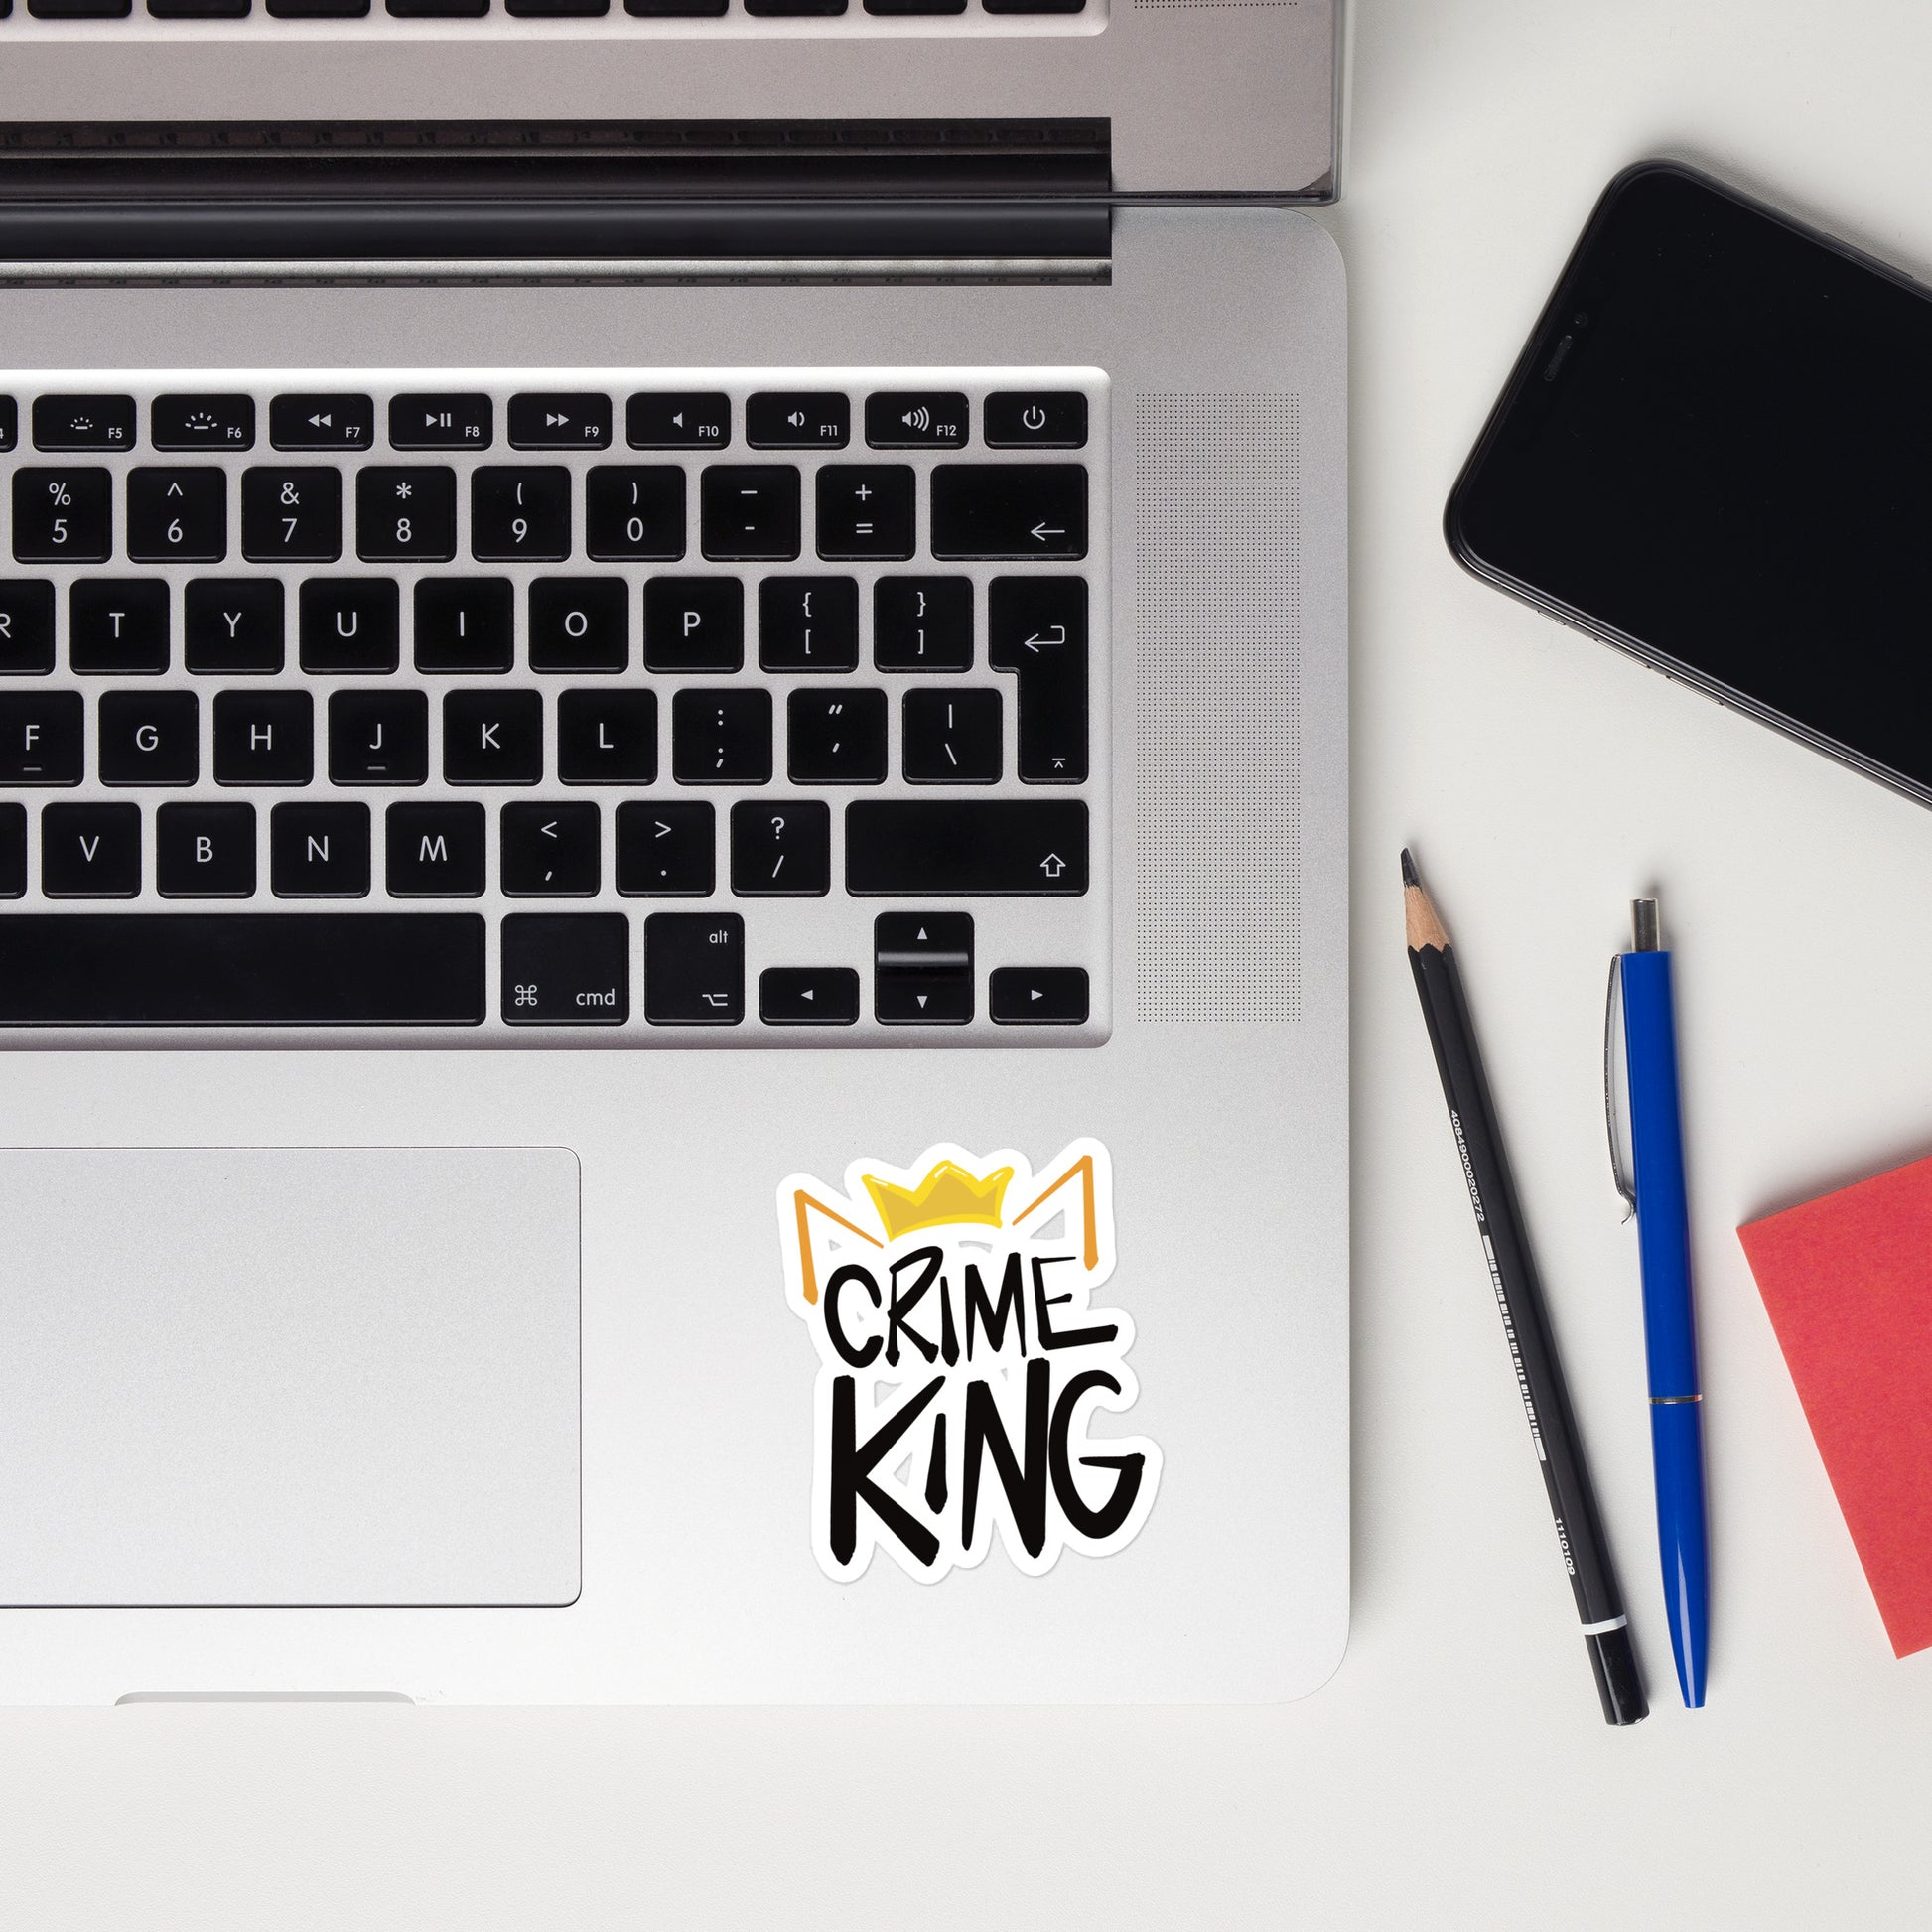 A sticker on a laptop has orange cat ears and a yellow crown over the words "Crime King" in bold writing.